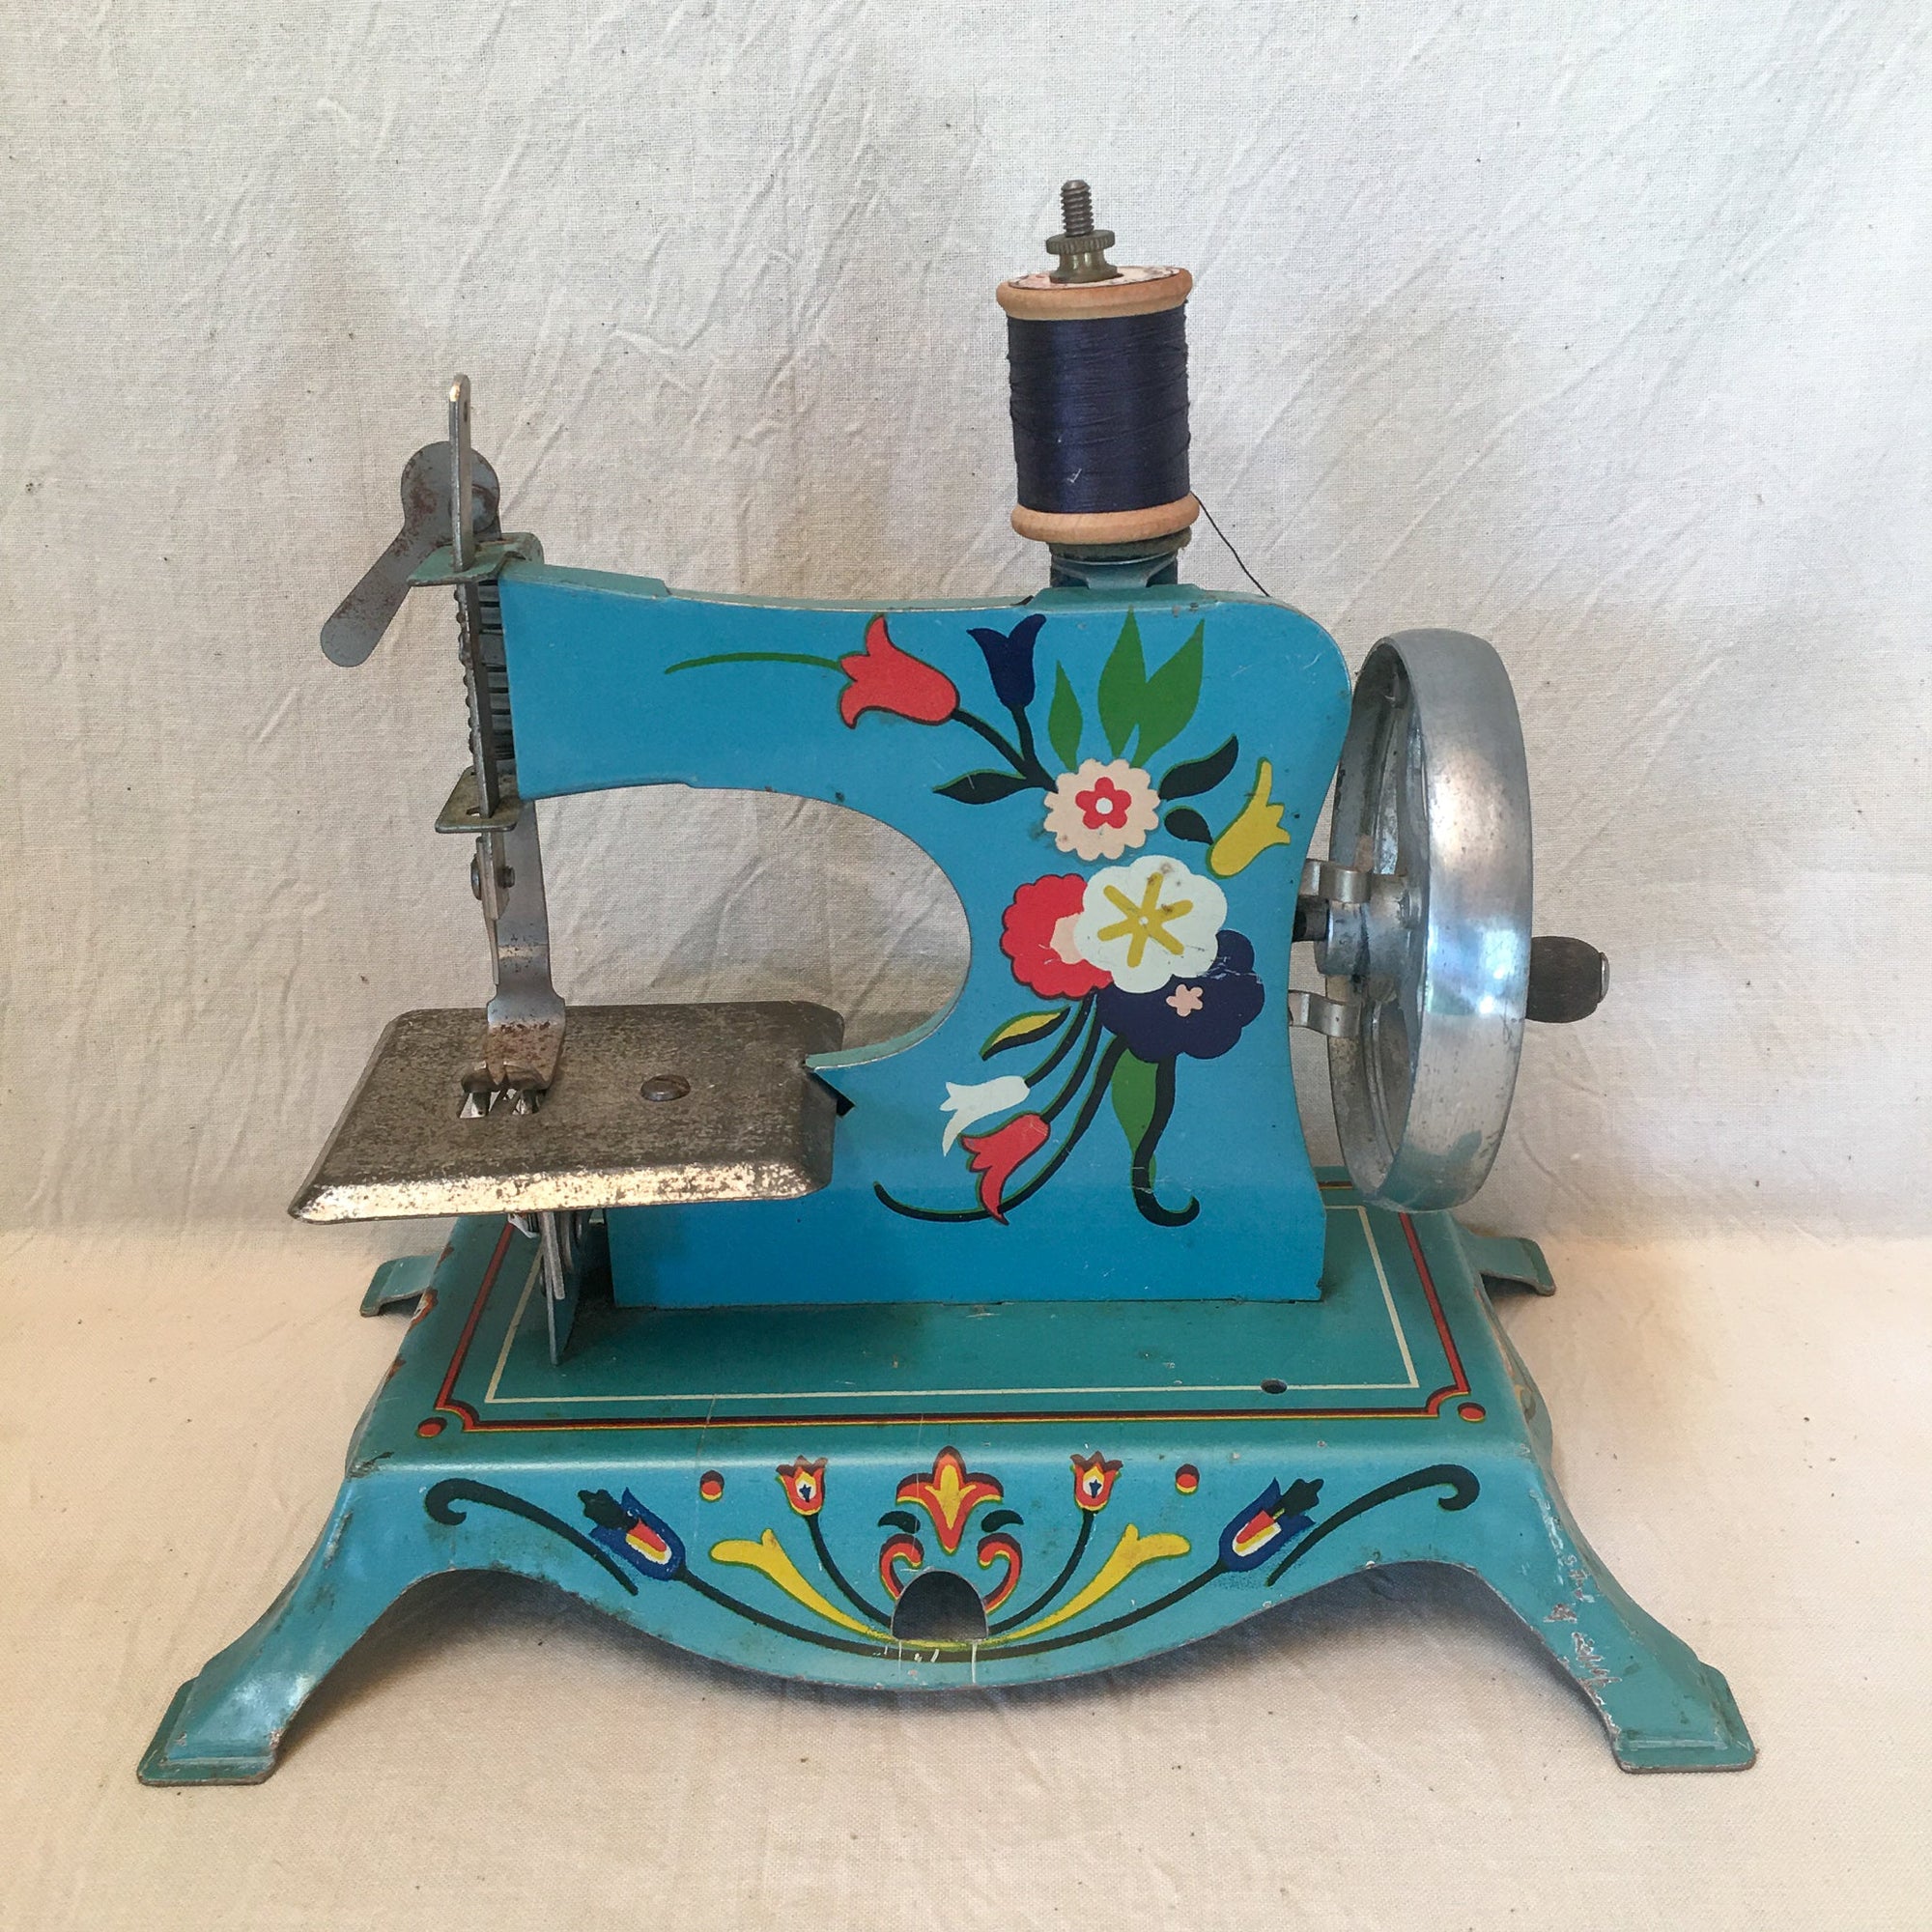 1940’s Toy Sewing Machine with Flowers!